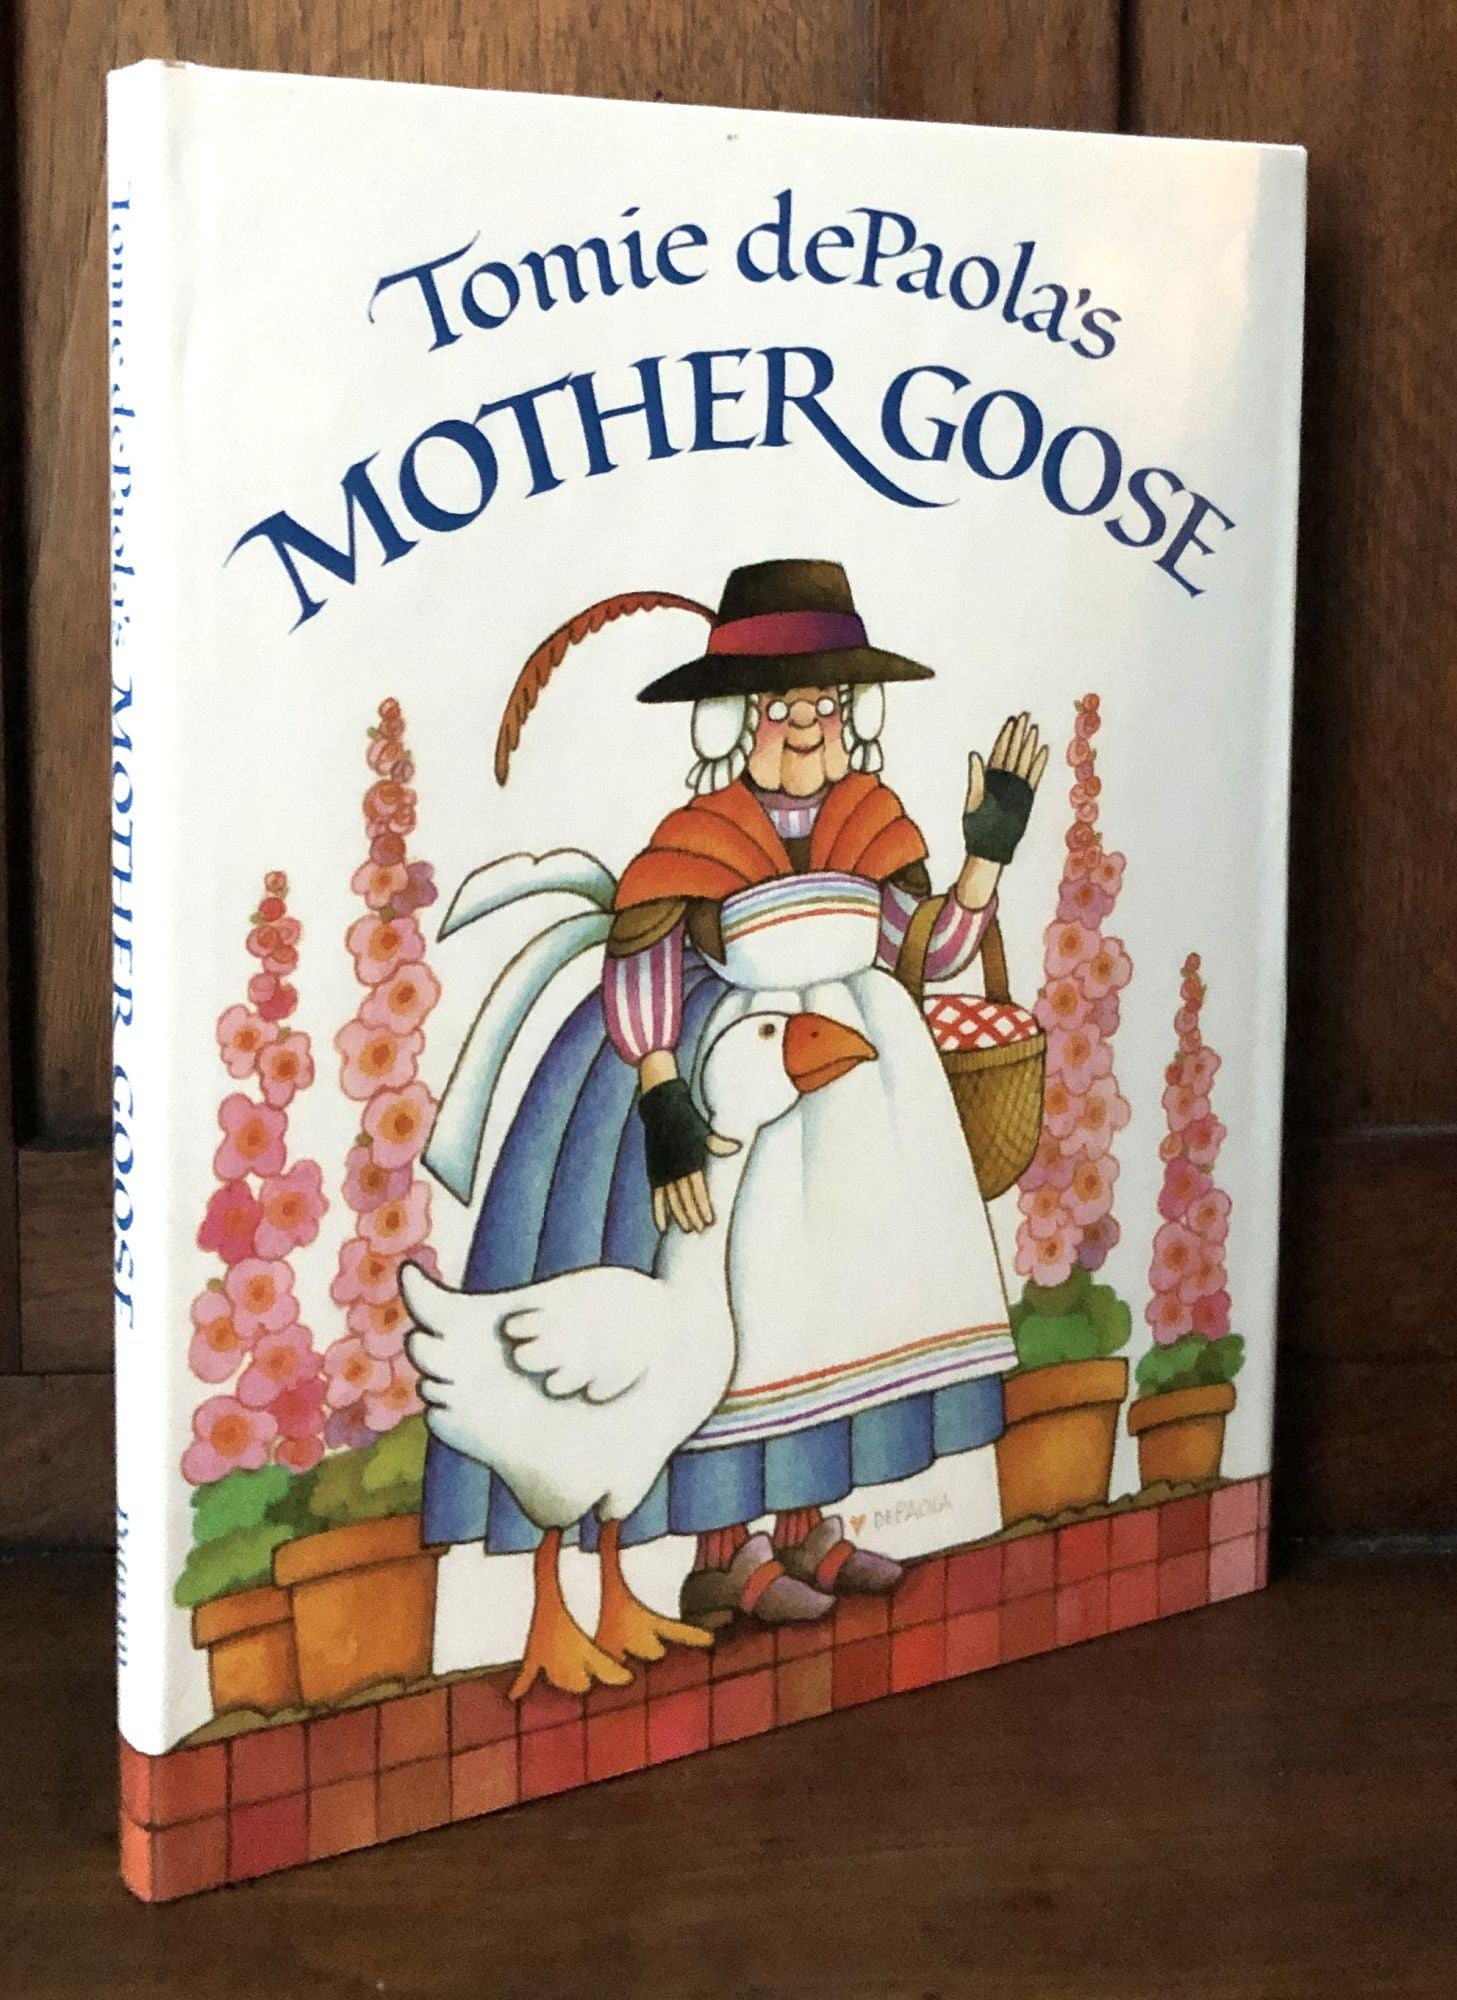 Tomie dePaola's Mother Goose - signed by Tomie dePaola on Common Crow Books